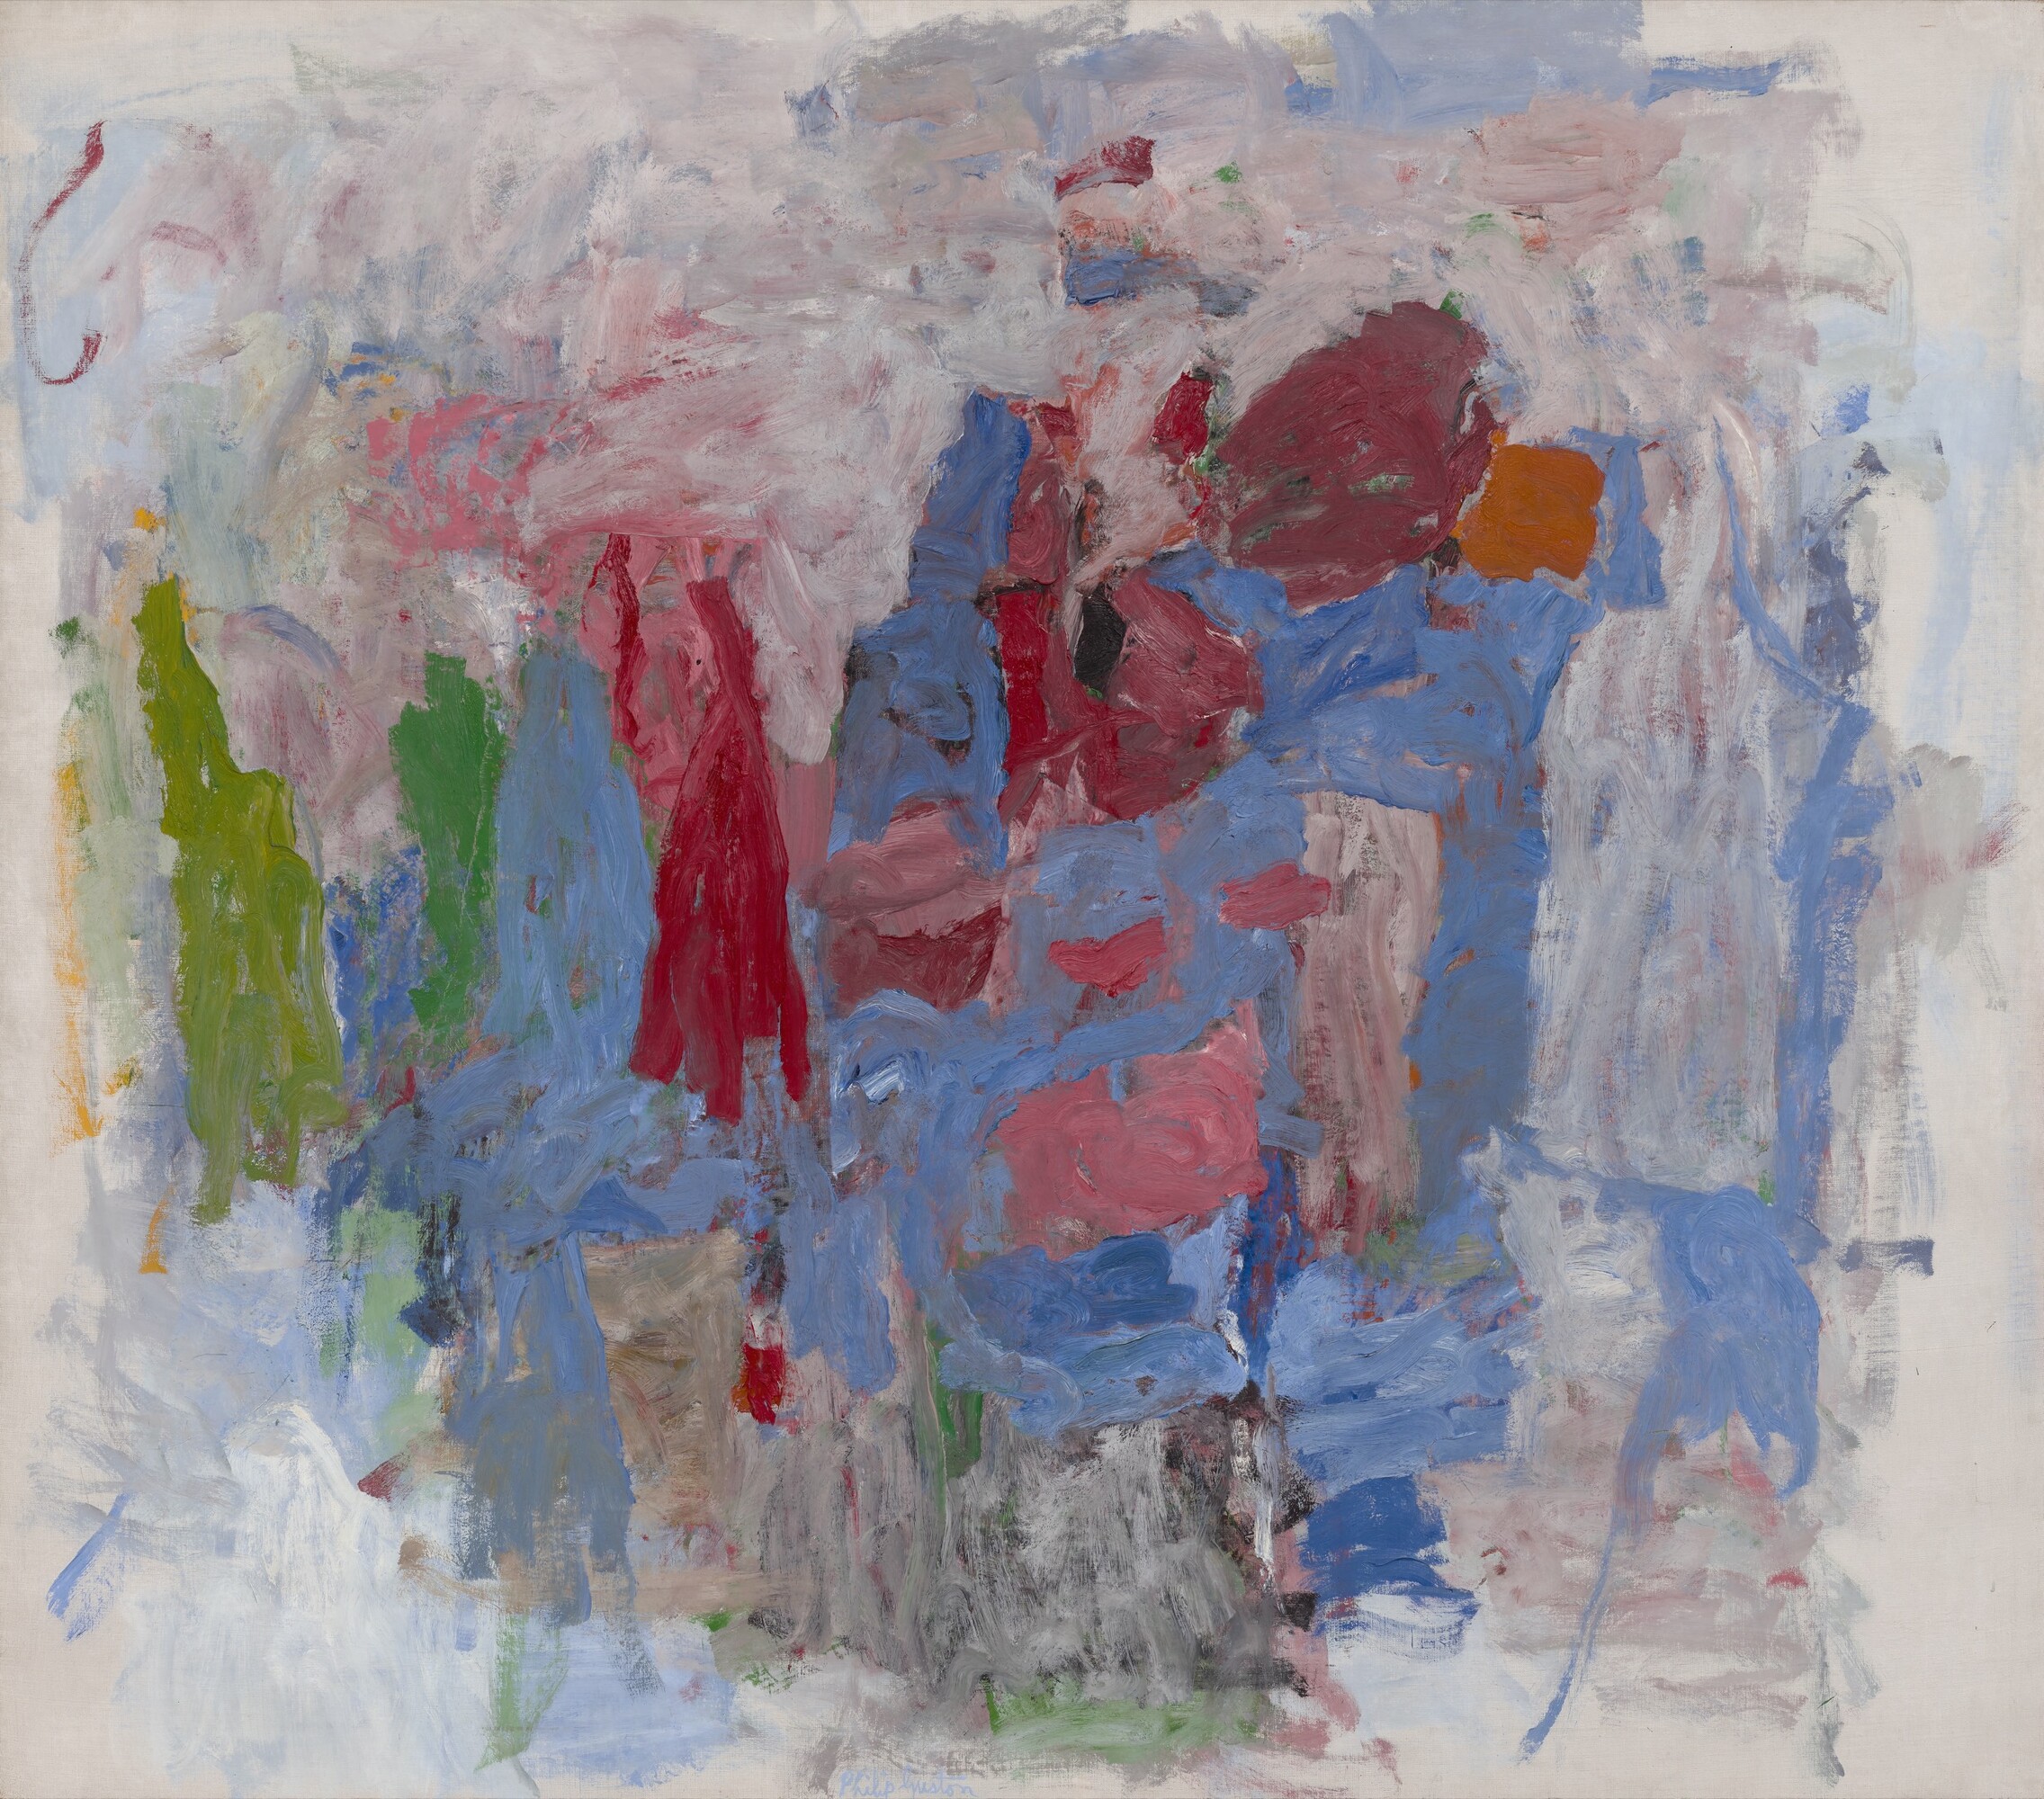 Philip Guston, Passage, 1957-8, oil on canvas, 175.3 × 199.4 cm, the Museum of Fine Arts, Houston, Bequest of Caroline Wiess Law, 2004.20. © Estate of Estate of Philip Guston, courtesy Hauser &amp; Wirth. Photograph © The Museum of Fine Arts, Houston; Will Michels